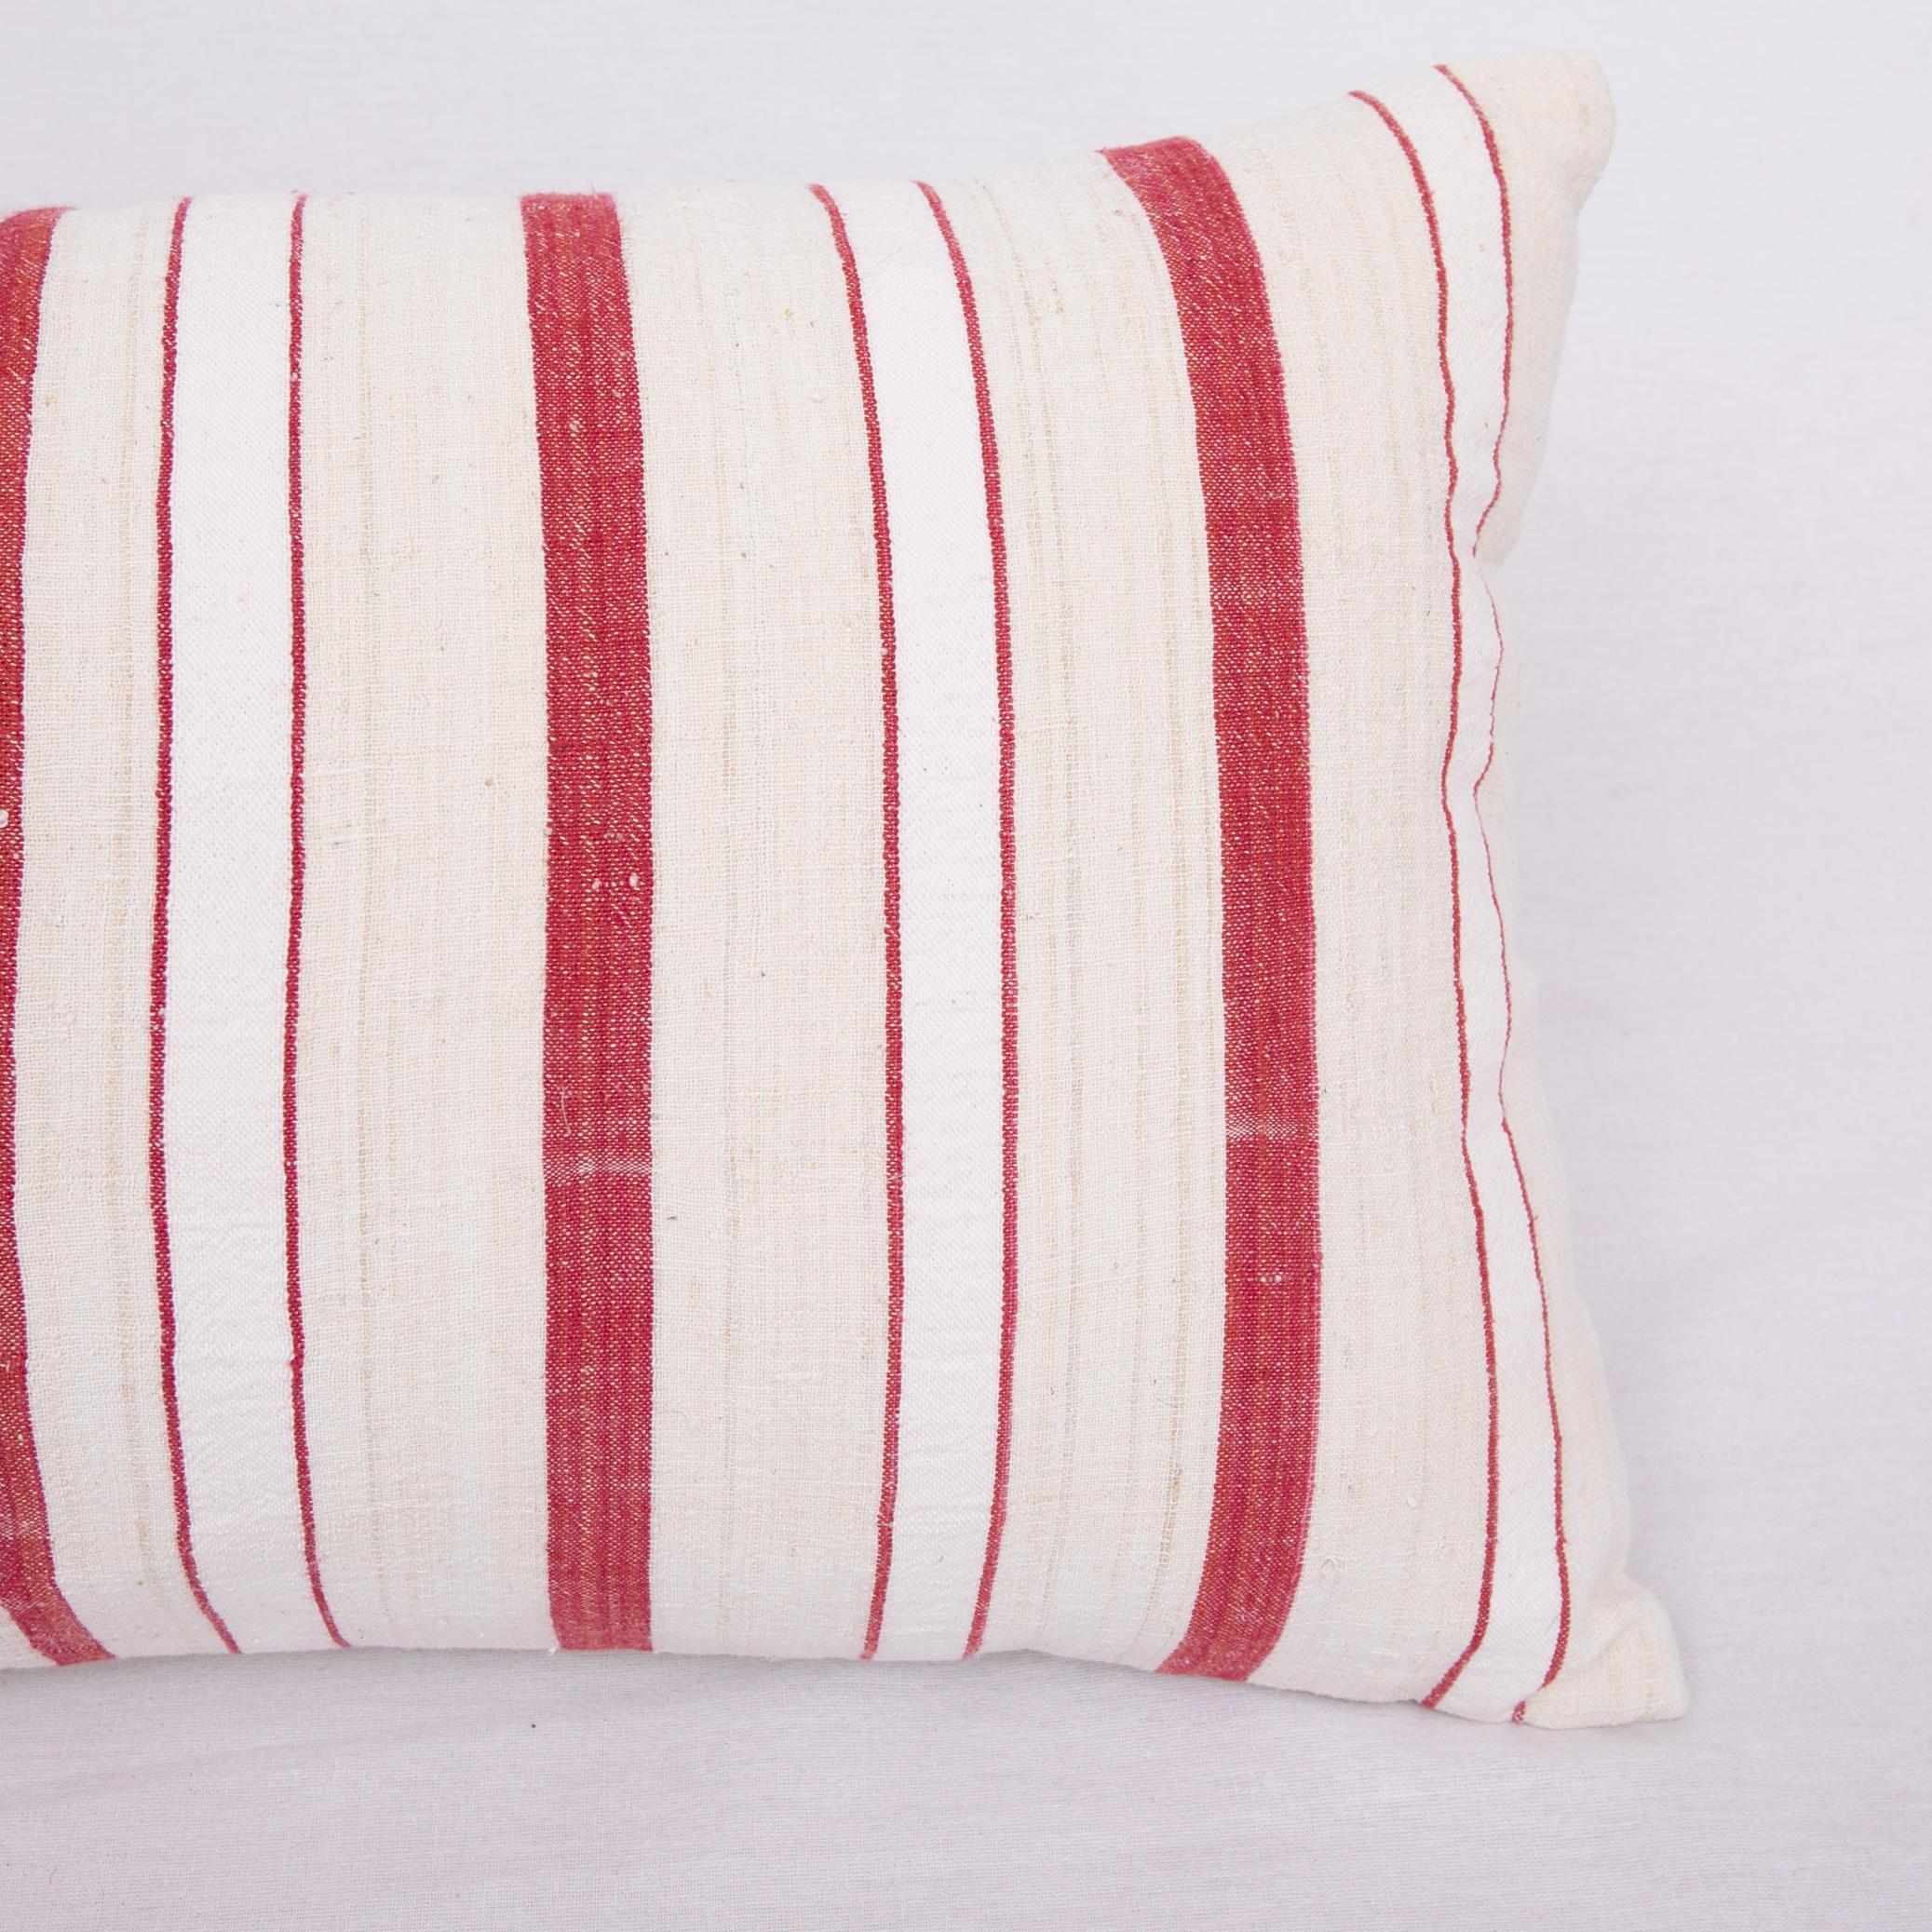 Turkish Pillow Case Fashioned from an Anatolian Vintage Cotton Fabric, 1960s